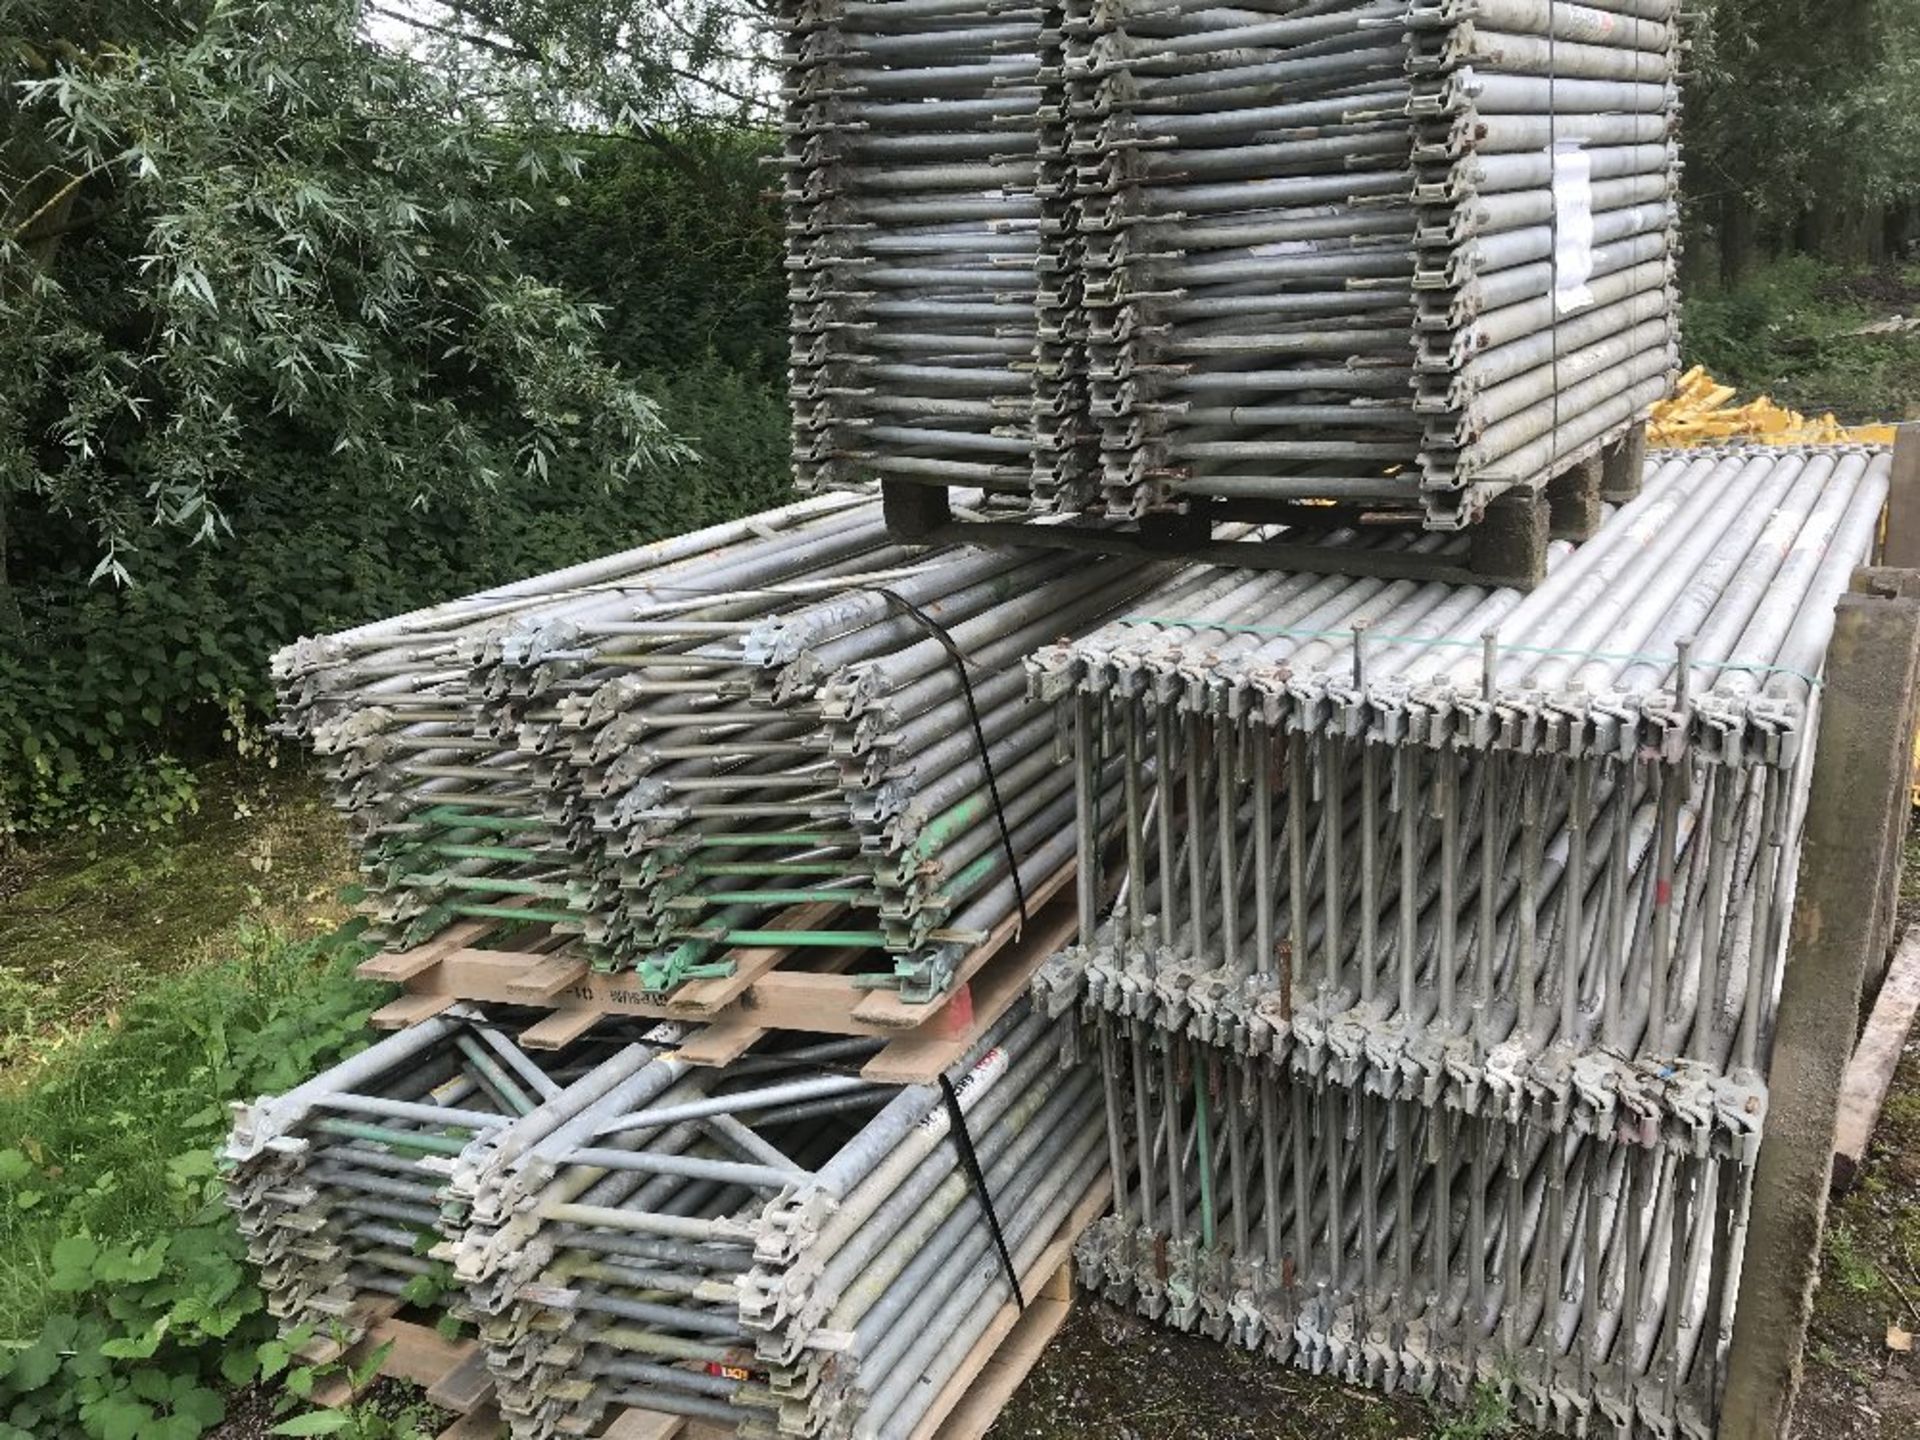 4NO PALLETS OF PERI MRK201,120 AND 150 SUPPORT FRAMES. - Image 3 of 4